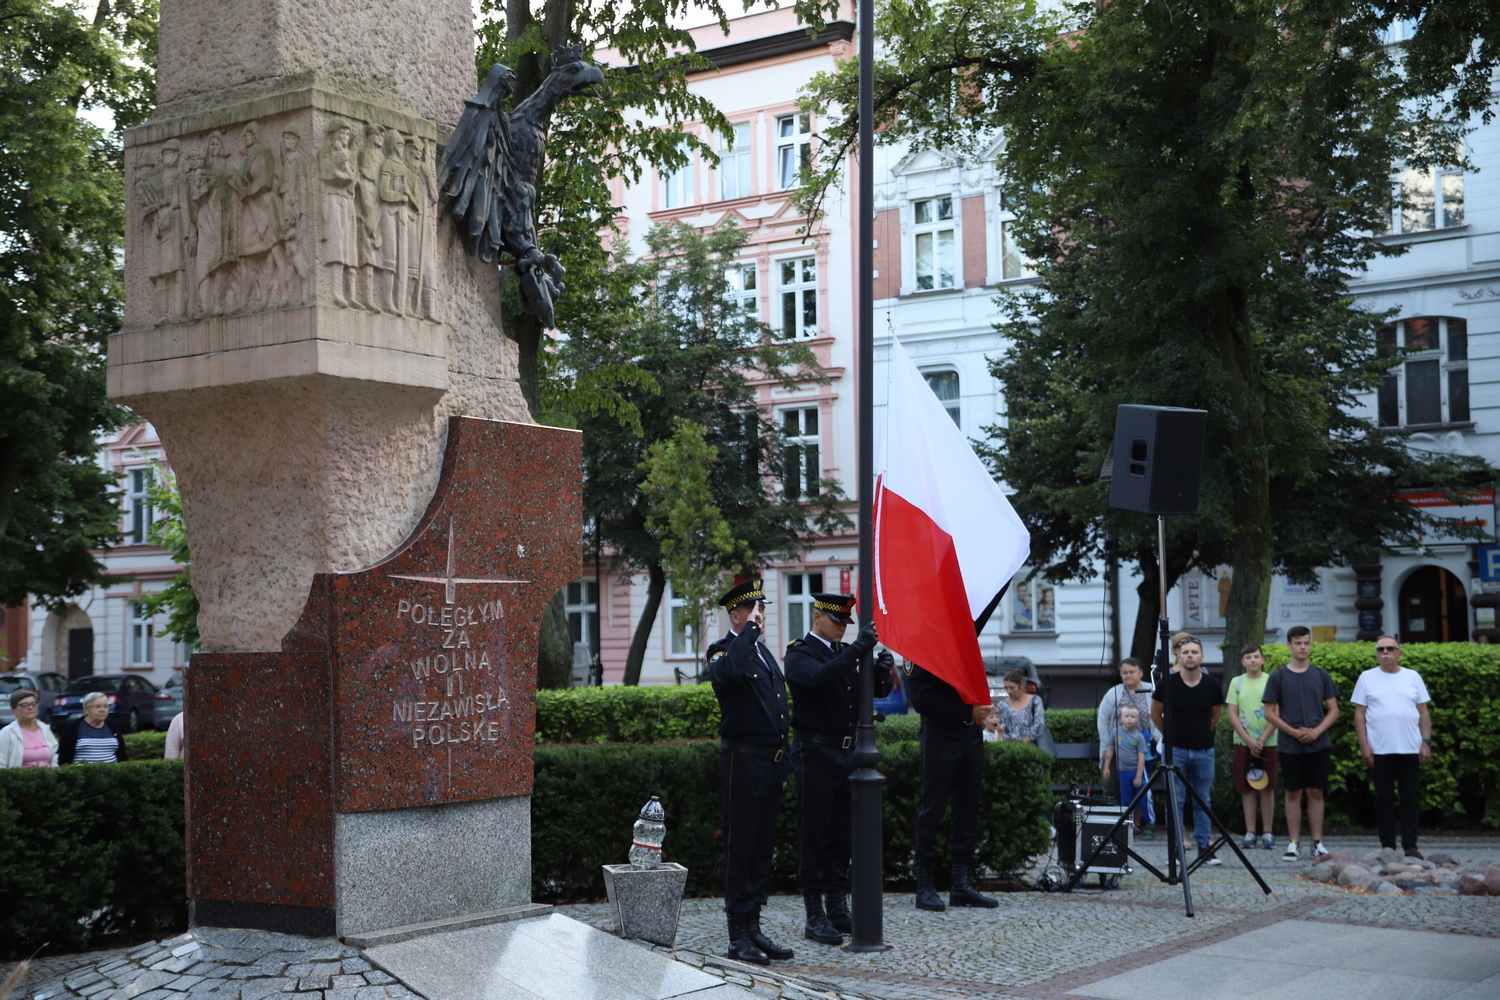 The people of Ełk commemorated the Warsaw Uprising